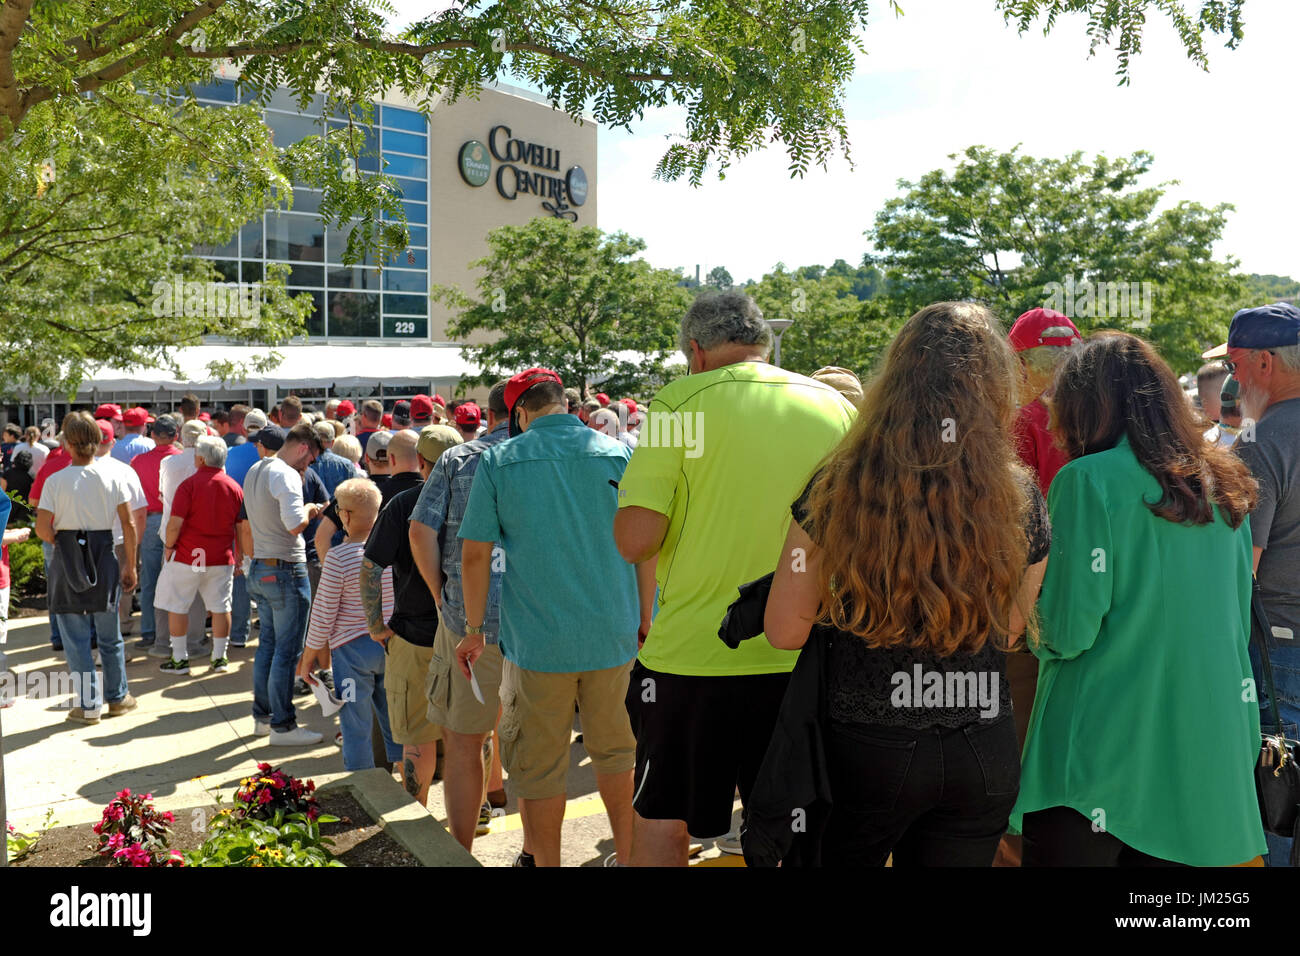 Youngstown, Ohio, USA. 25th July, 2017. President Trump supporters wait outside the Covelli Centre in Youngstown, Ohio to get inside to watch and participate in the Trump rally. Credit: Mark Kanning/Alamy Live News Stock Photo